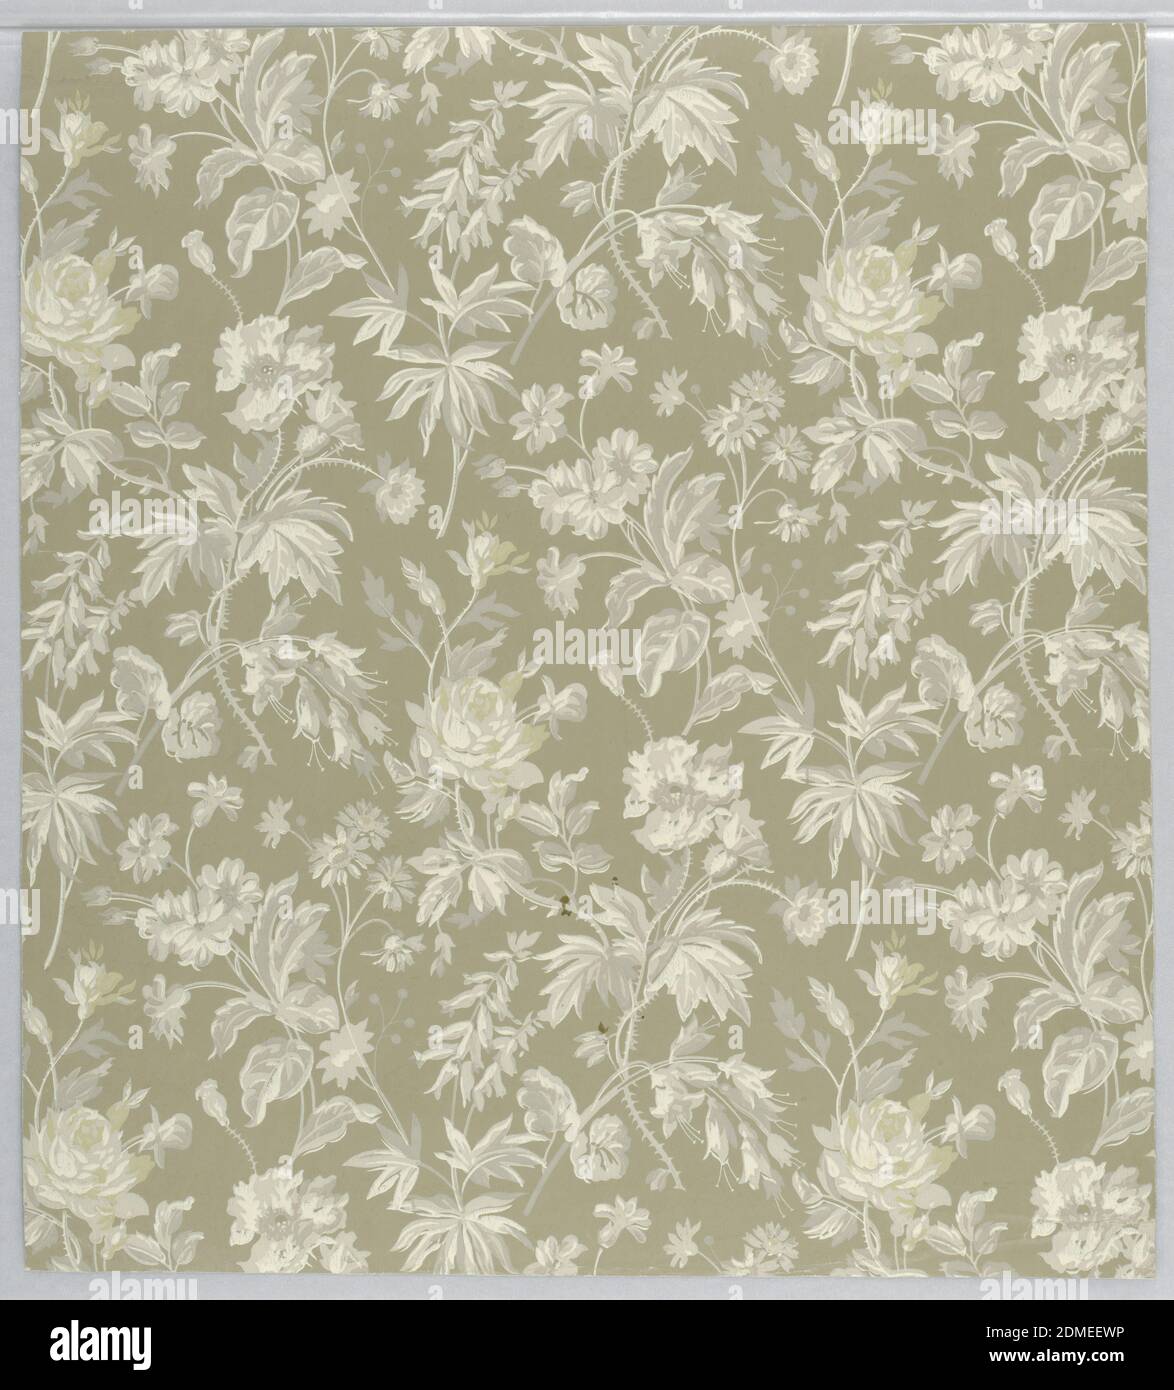 Sidewall, Machine-printed paper, Aesthetic all-over pattern of sprigs of roses and other flowers; three motifs arranged in a diamond-shaped repeat in off-set columns; greyscale coloration with naturalistic block shading; ground is light brown., USA, ca. 1880, Wallcoverings, Sidewall Stock Photo